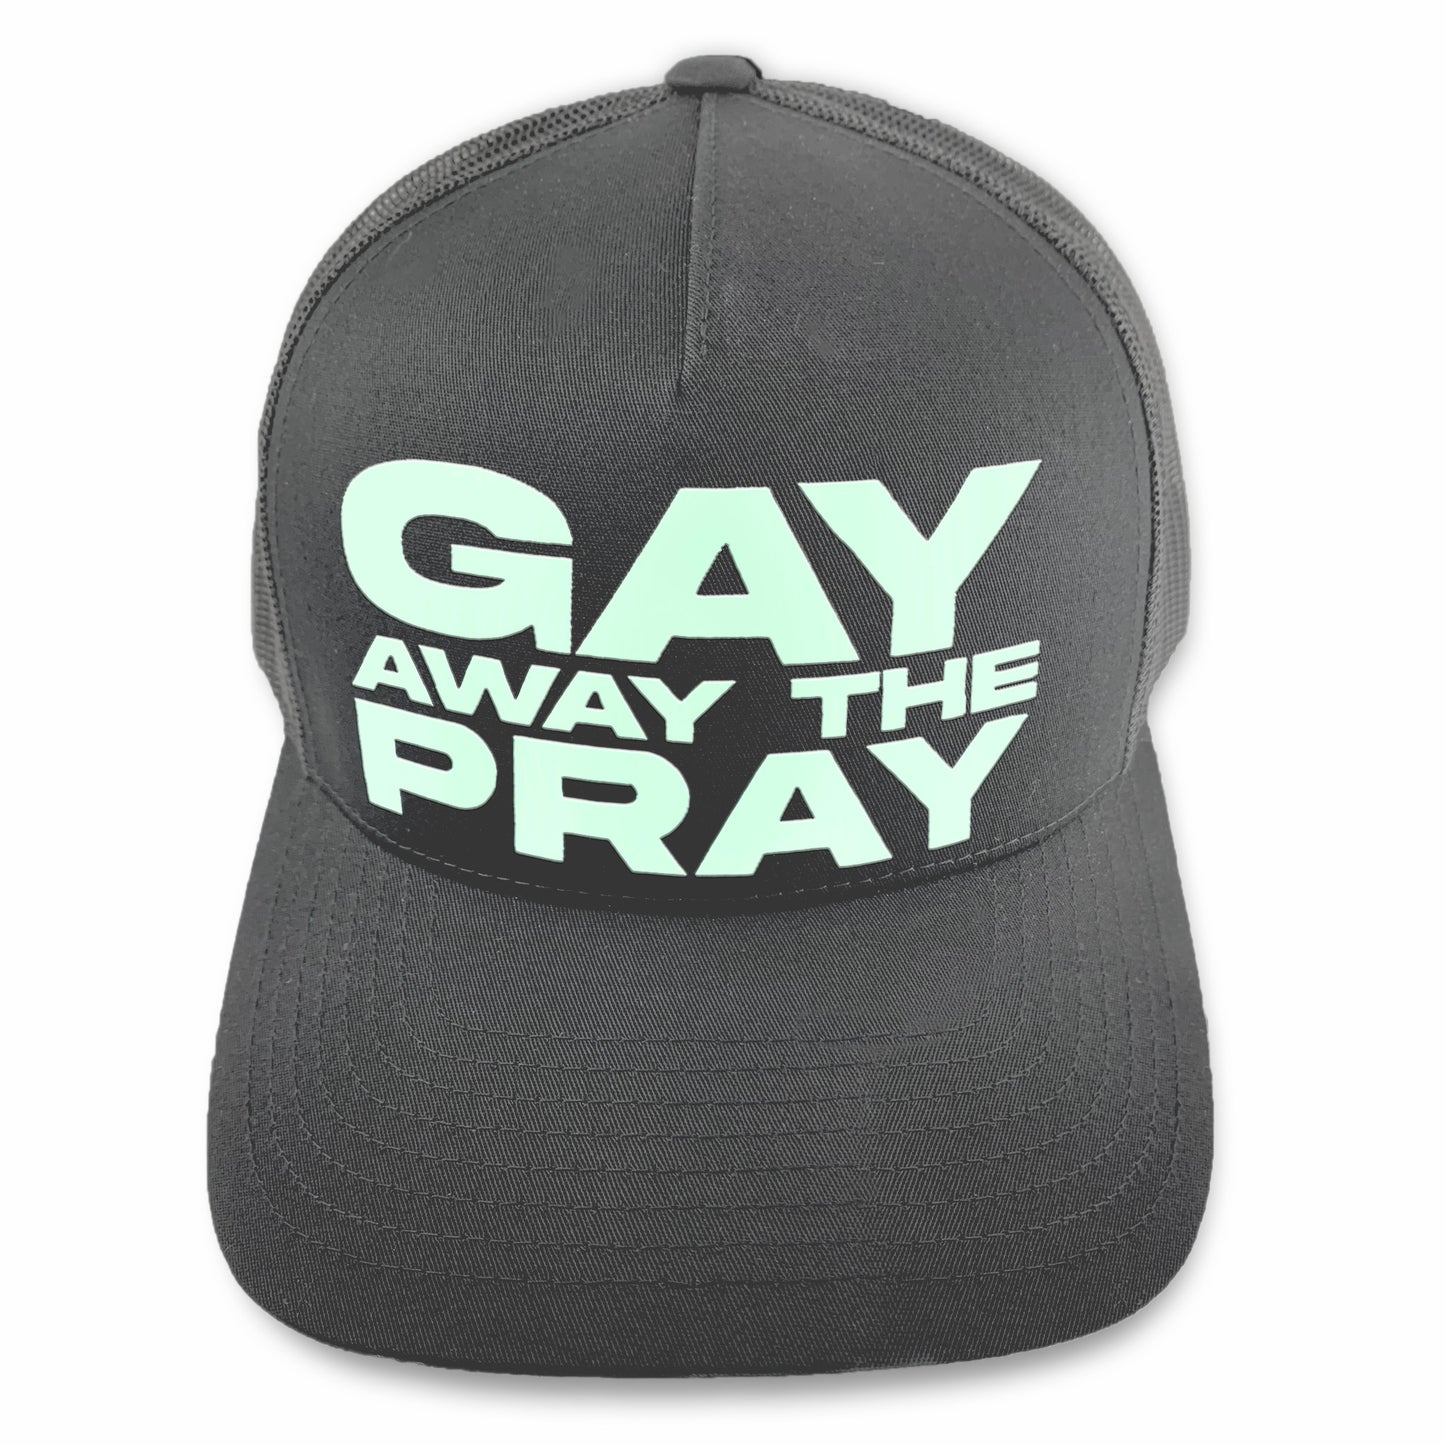 Gay Away The Pray ball cap - unisex charcoal snapback hat with glow in the dark text by BBJ / Glitter Garage